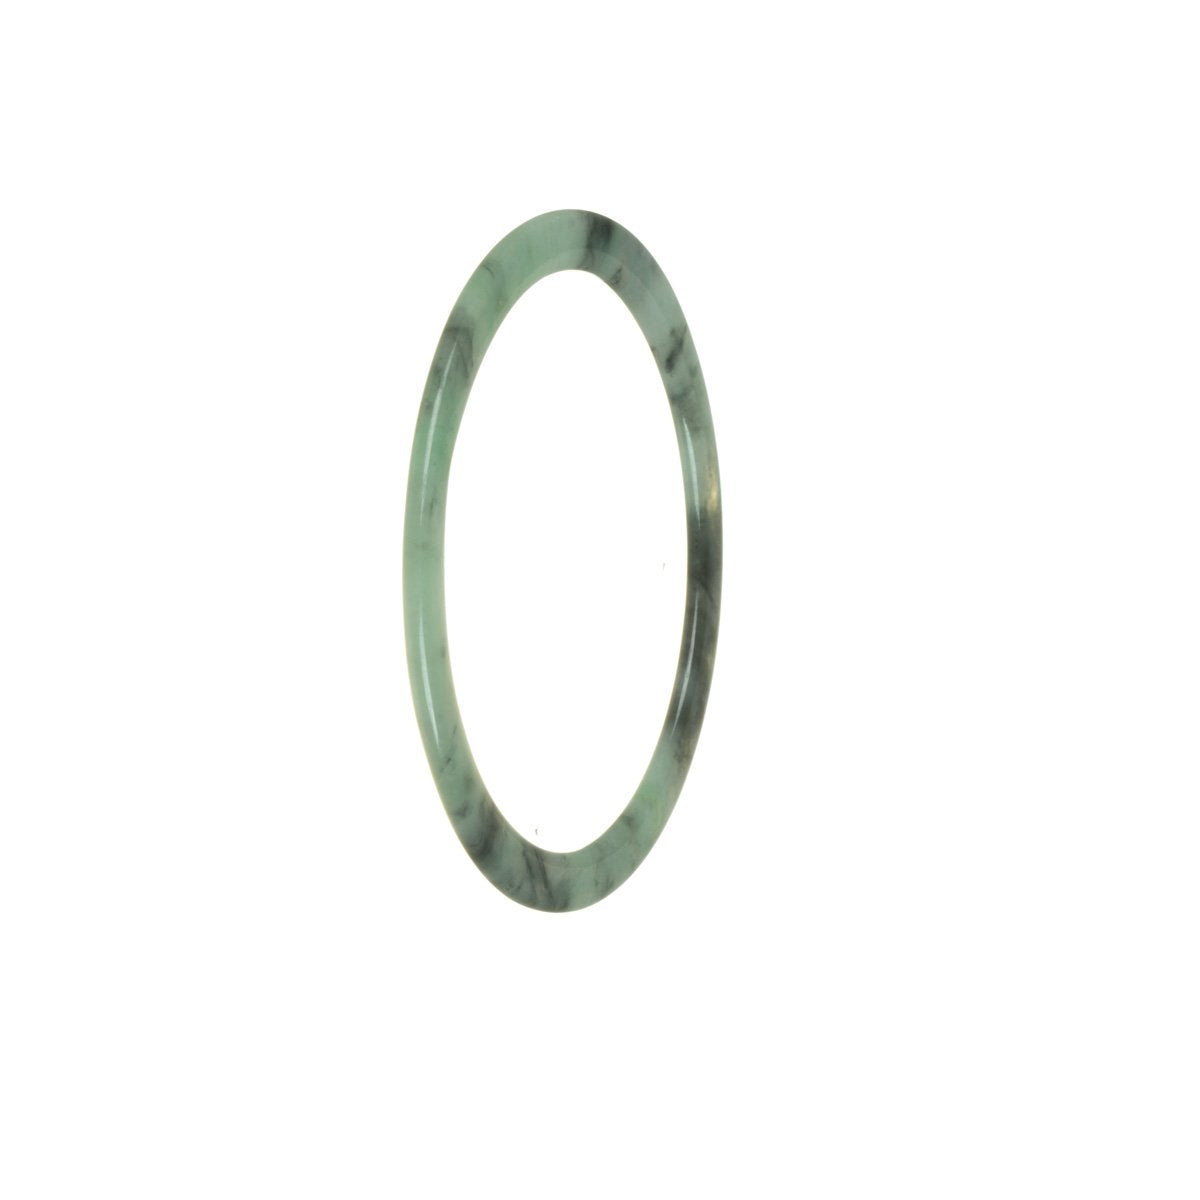 A close-up image of a thin, bangle-style bracelet made of genuine Grade A green with grey jade. The bracelet has a smooth, polished surface and a 55mm diameter. The brand name "MAYS" is engraved on the inner side of the bracelet.